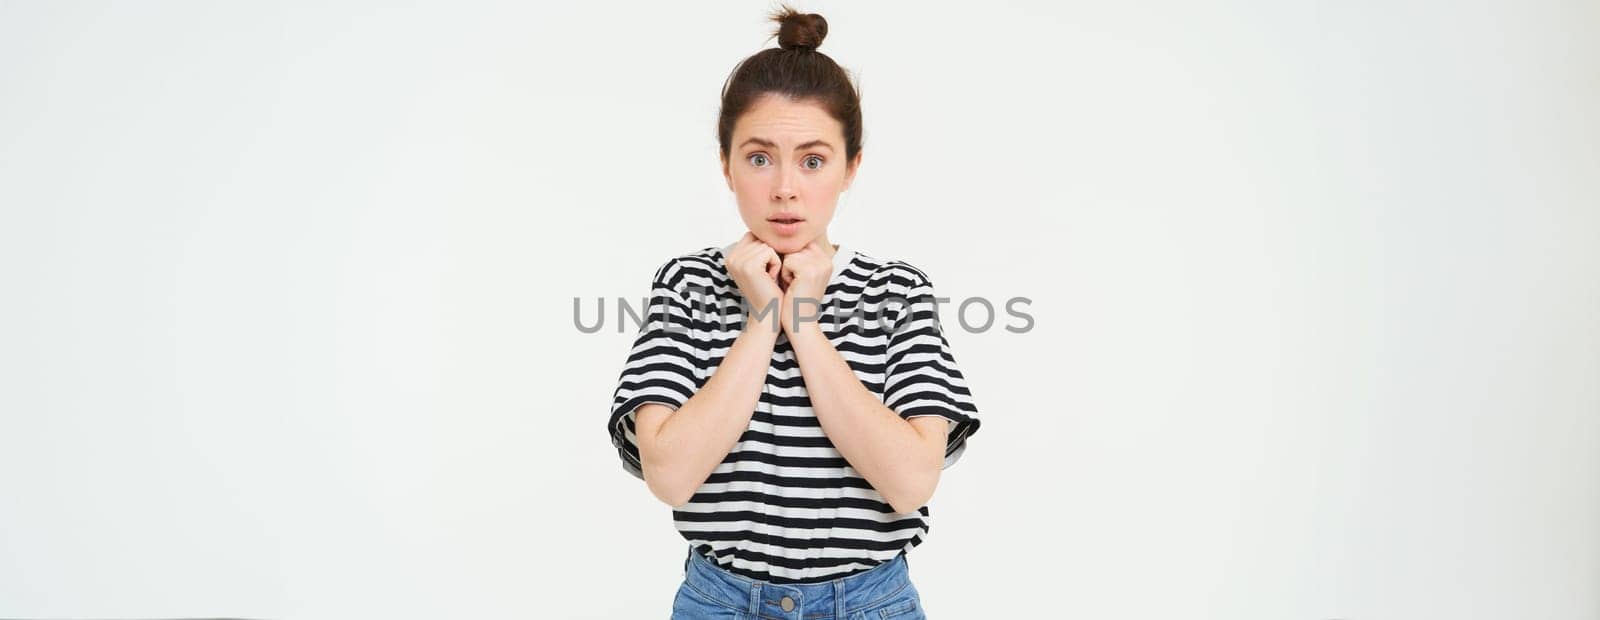 Portrait of young compassionate woman, looking with sympaty, gasping at camera, raising eyebrows, standing over white background.